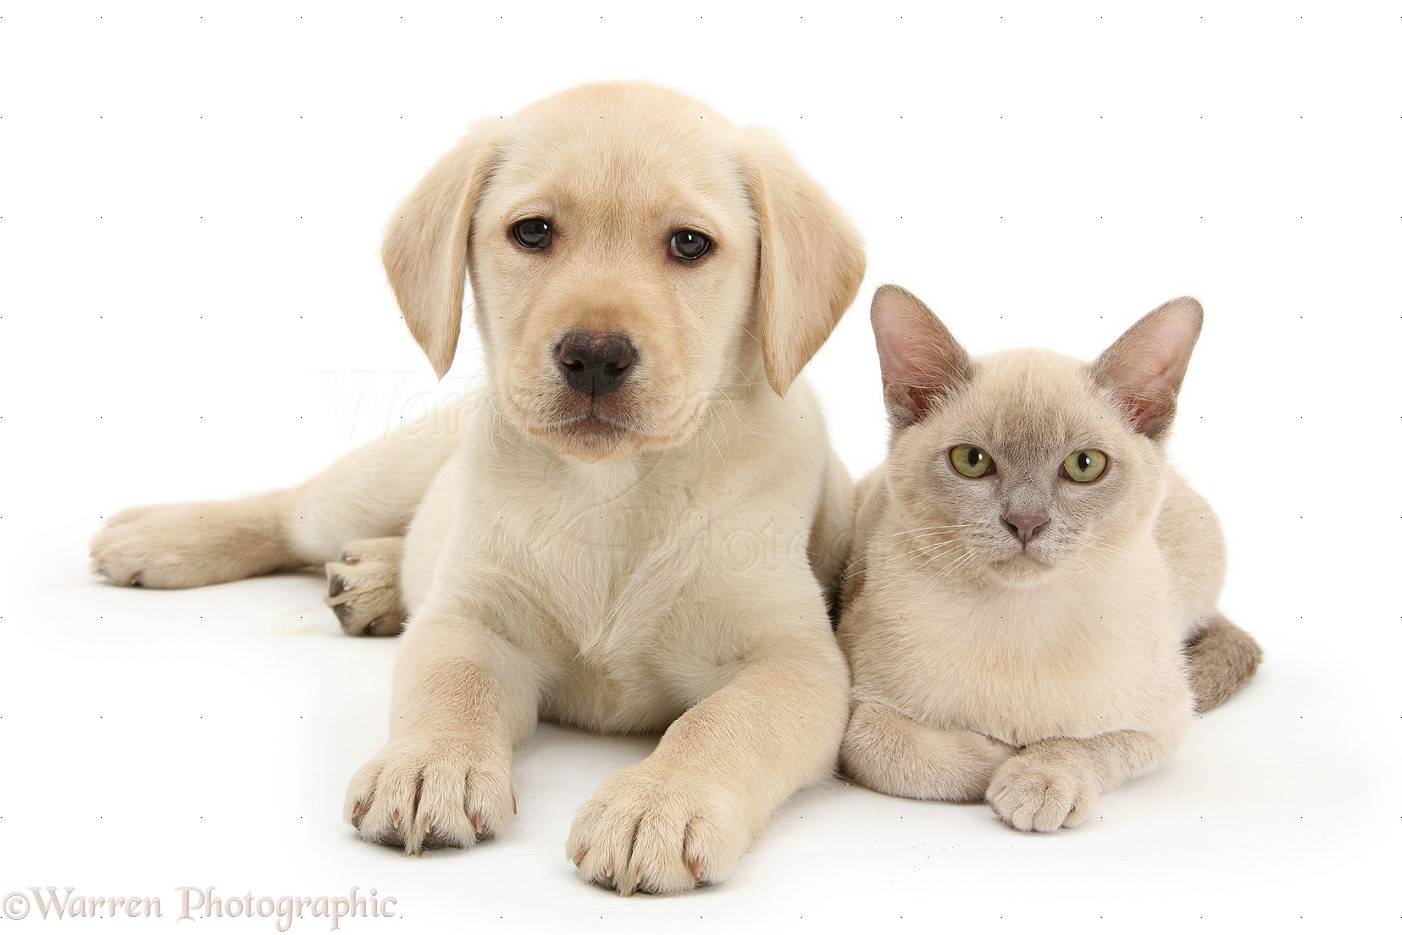 23528-Yellow-Labrador-Retriever-pup-and-young-Burmese-cat-white-background.jpg